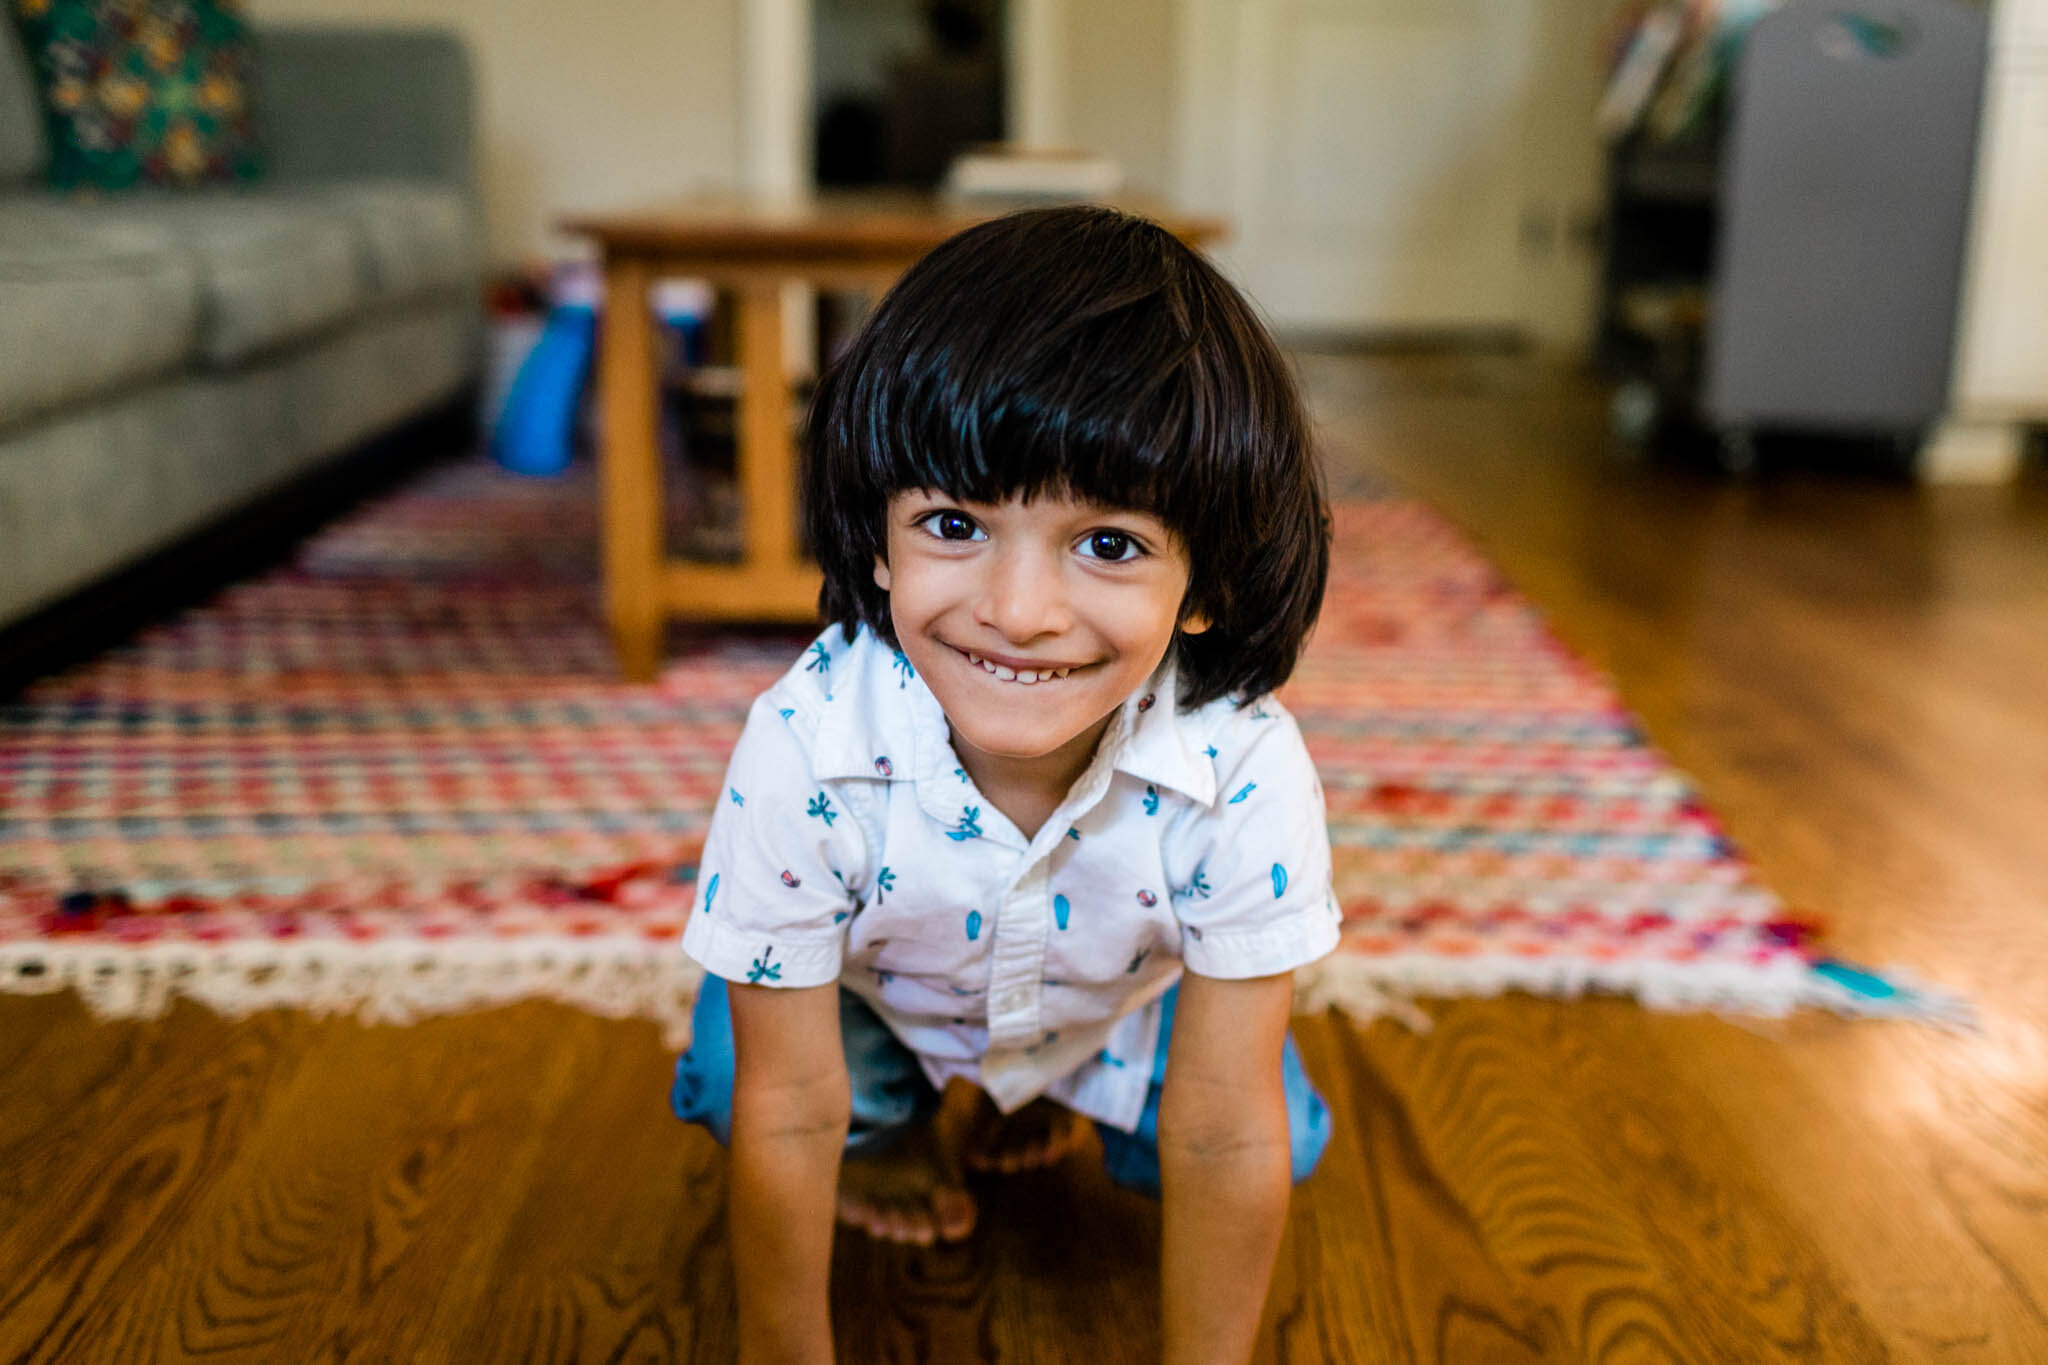 Durham Family Photographer | By G. Lin Photography | Young boy smiling at camera